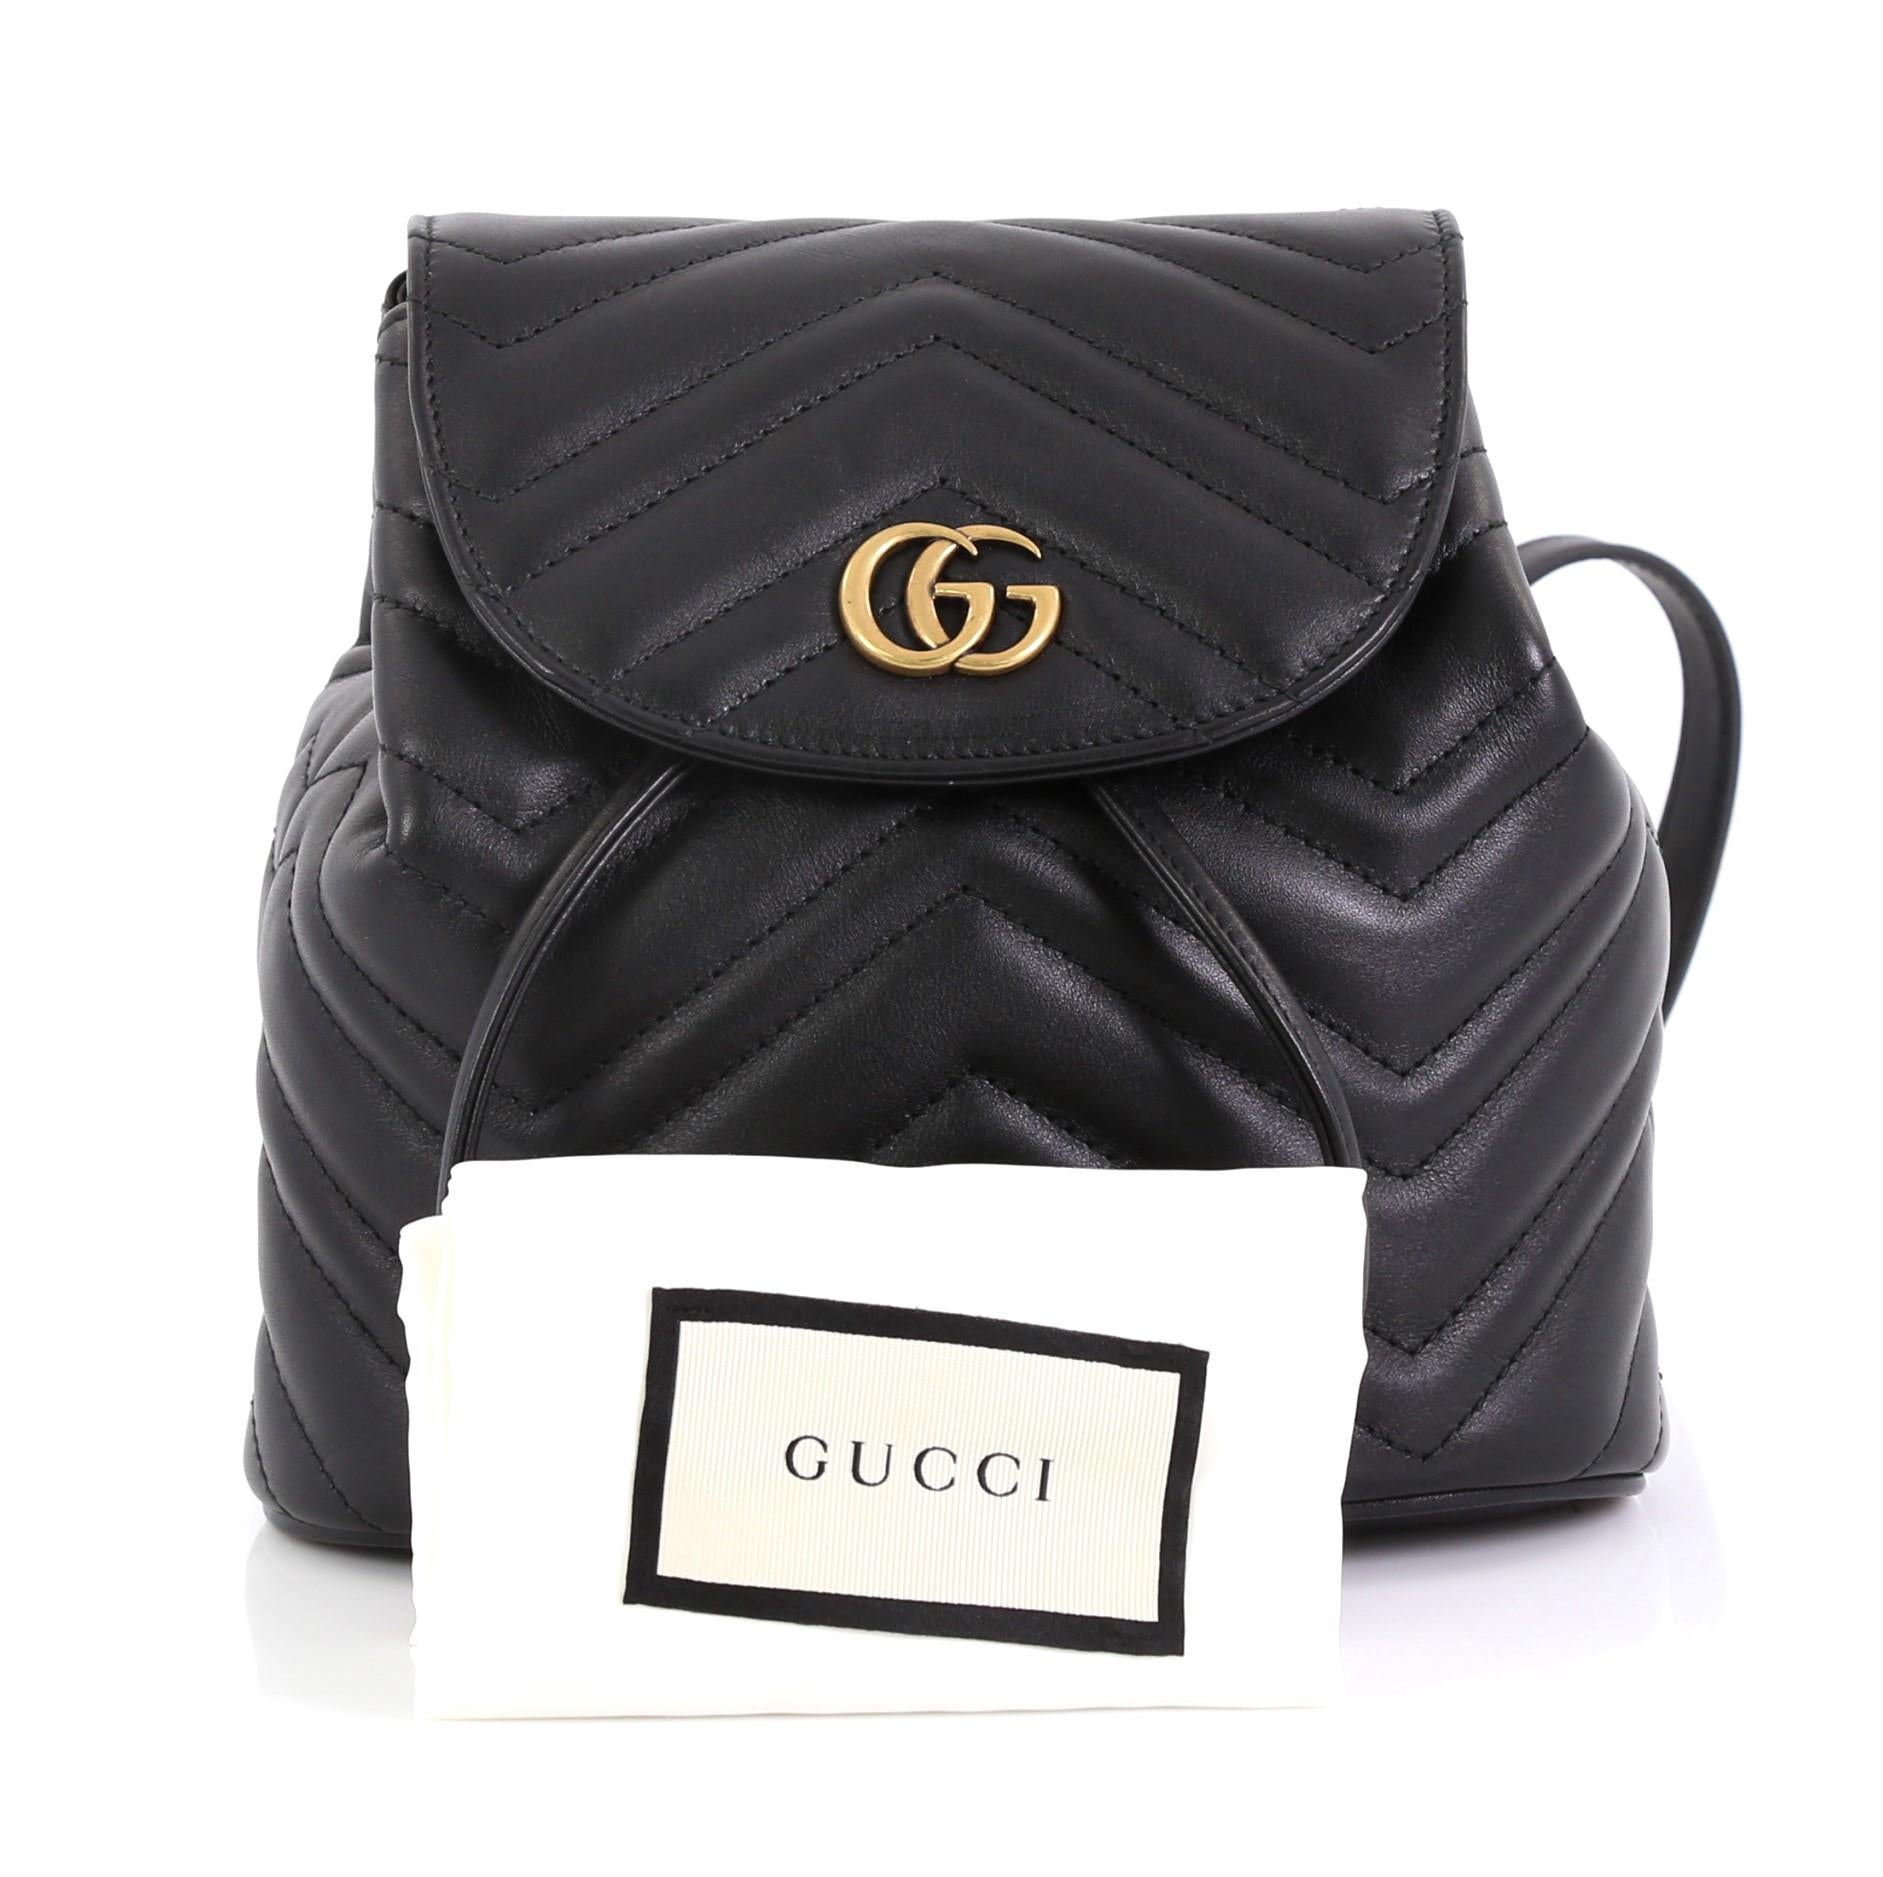 This Gucci GG Marmont Drawstring Backpack Matelasse Leather Mini, crafted from black matelasse leather, features dual leather straps with chain, interlocking GG logo on its flap, and aged gold-tone hardware. Its drawstring closure opens to a neutral